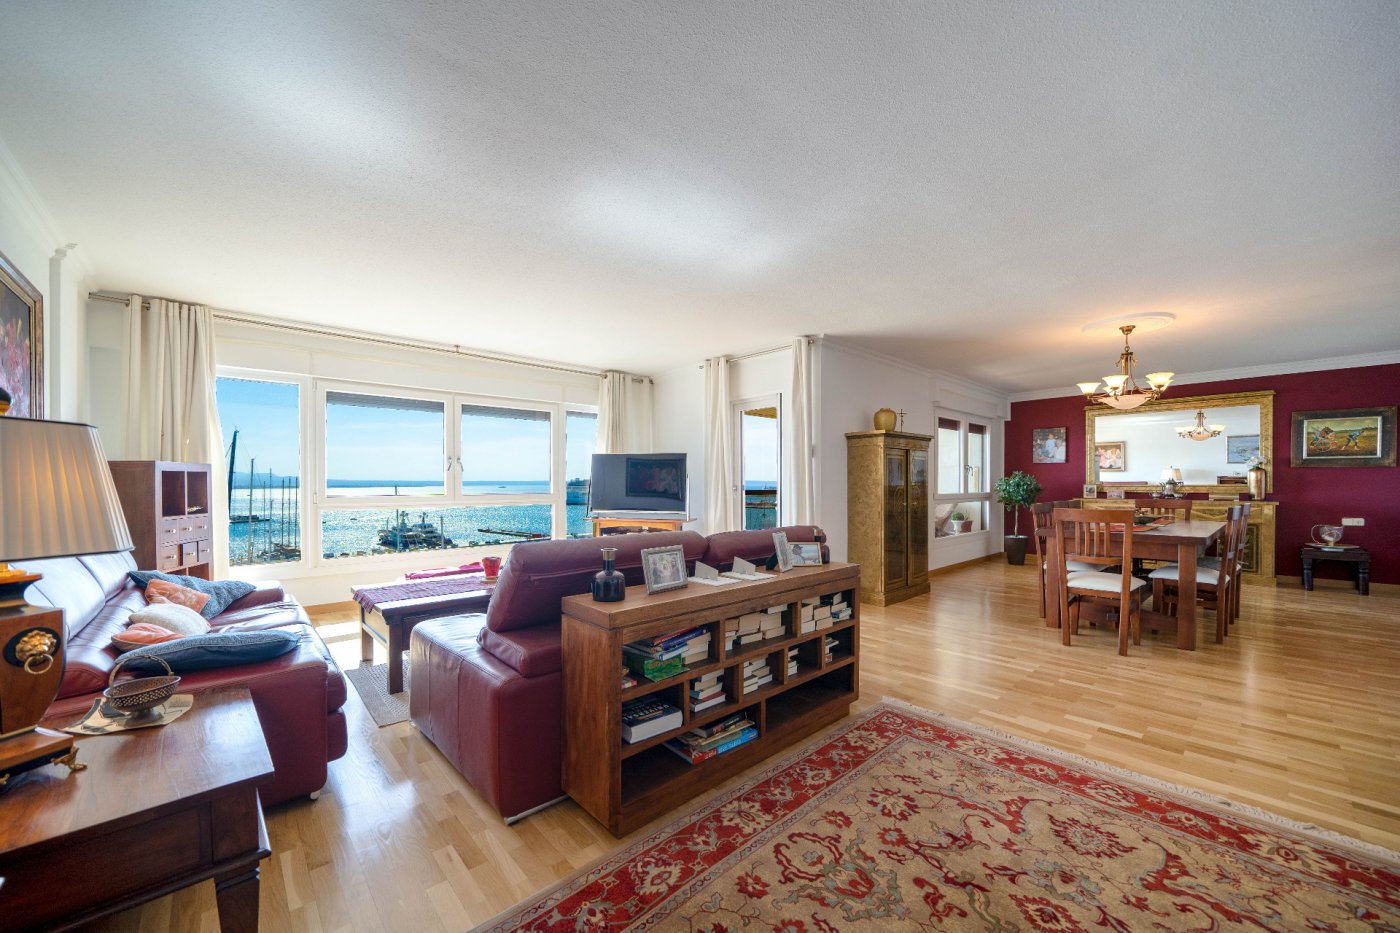 Penthouse in Paseo Marítimo with spectacular views of the sea, the port, the city and the Cathedral.